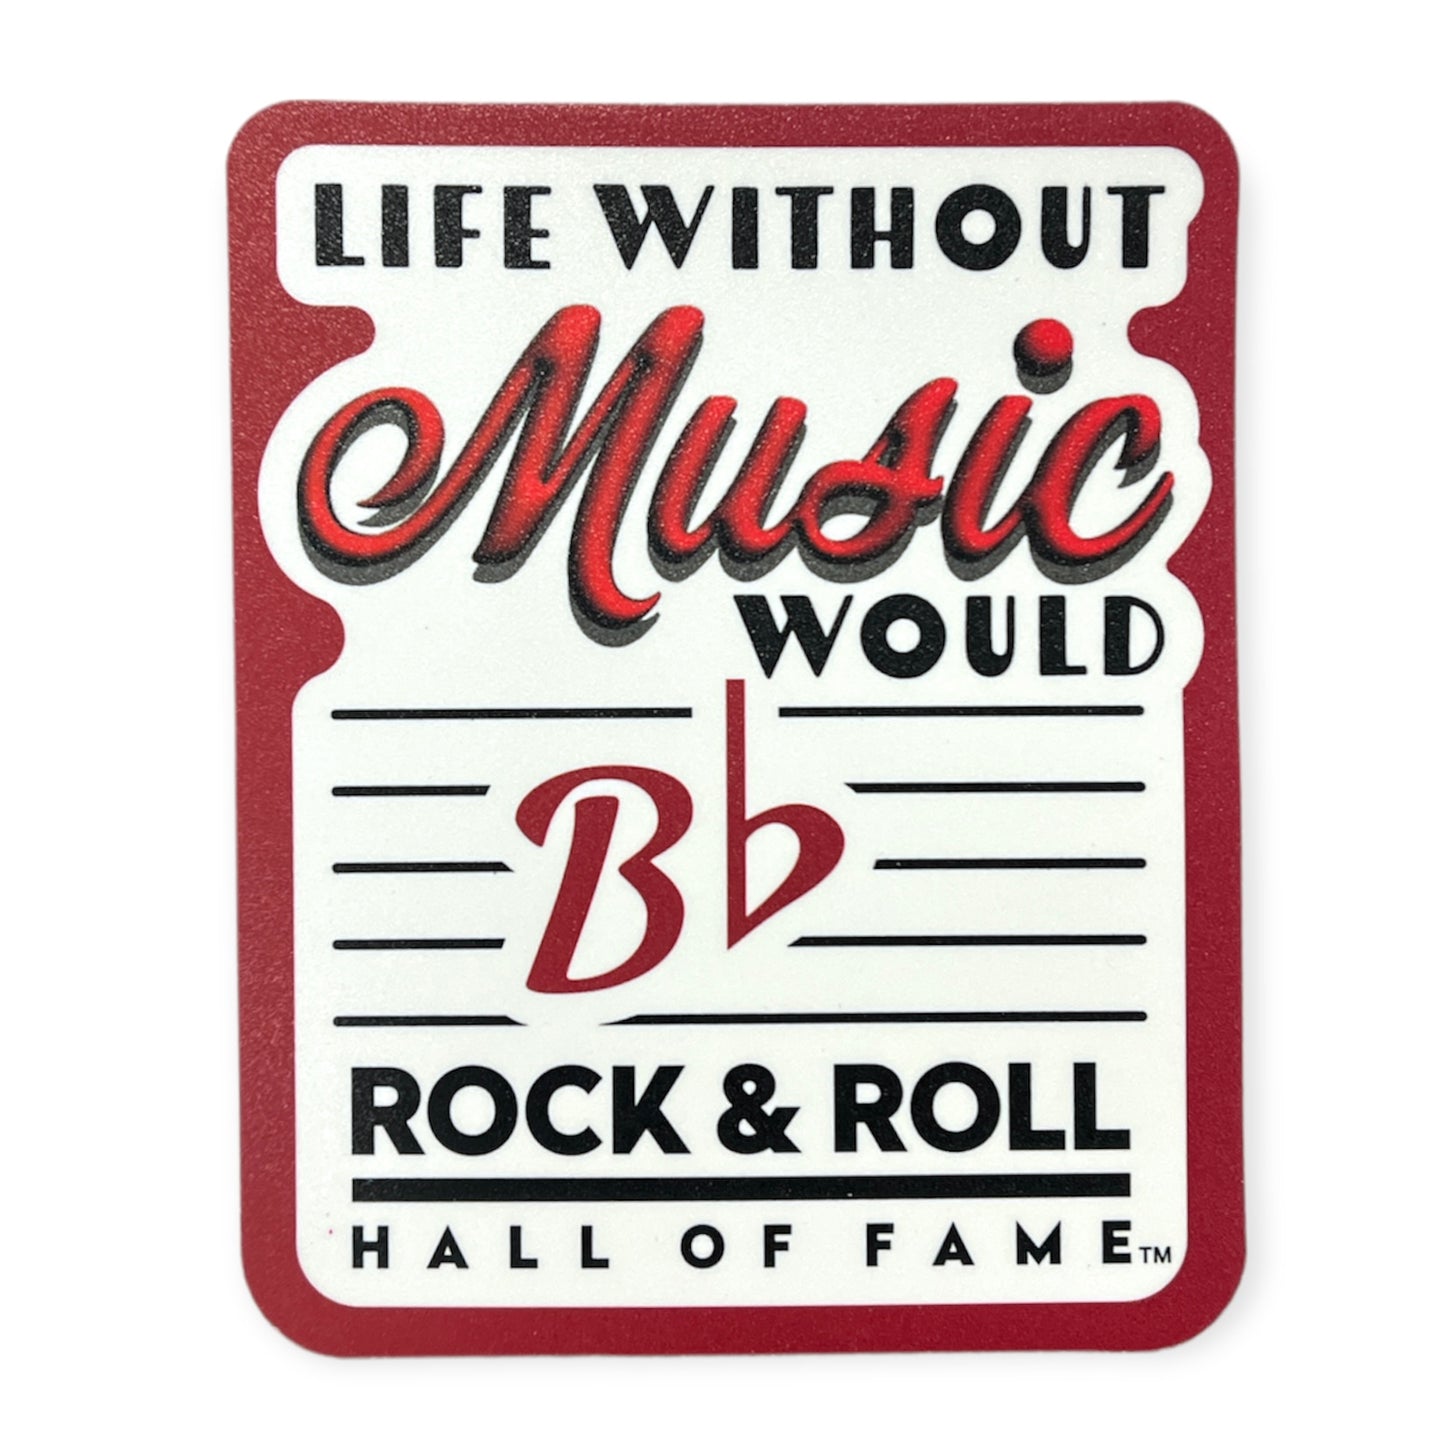 ROCK HALL LIFE WITHOUT MUSIC STICKER